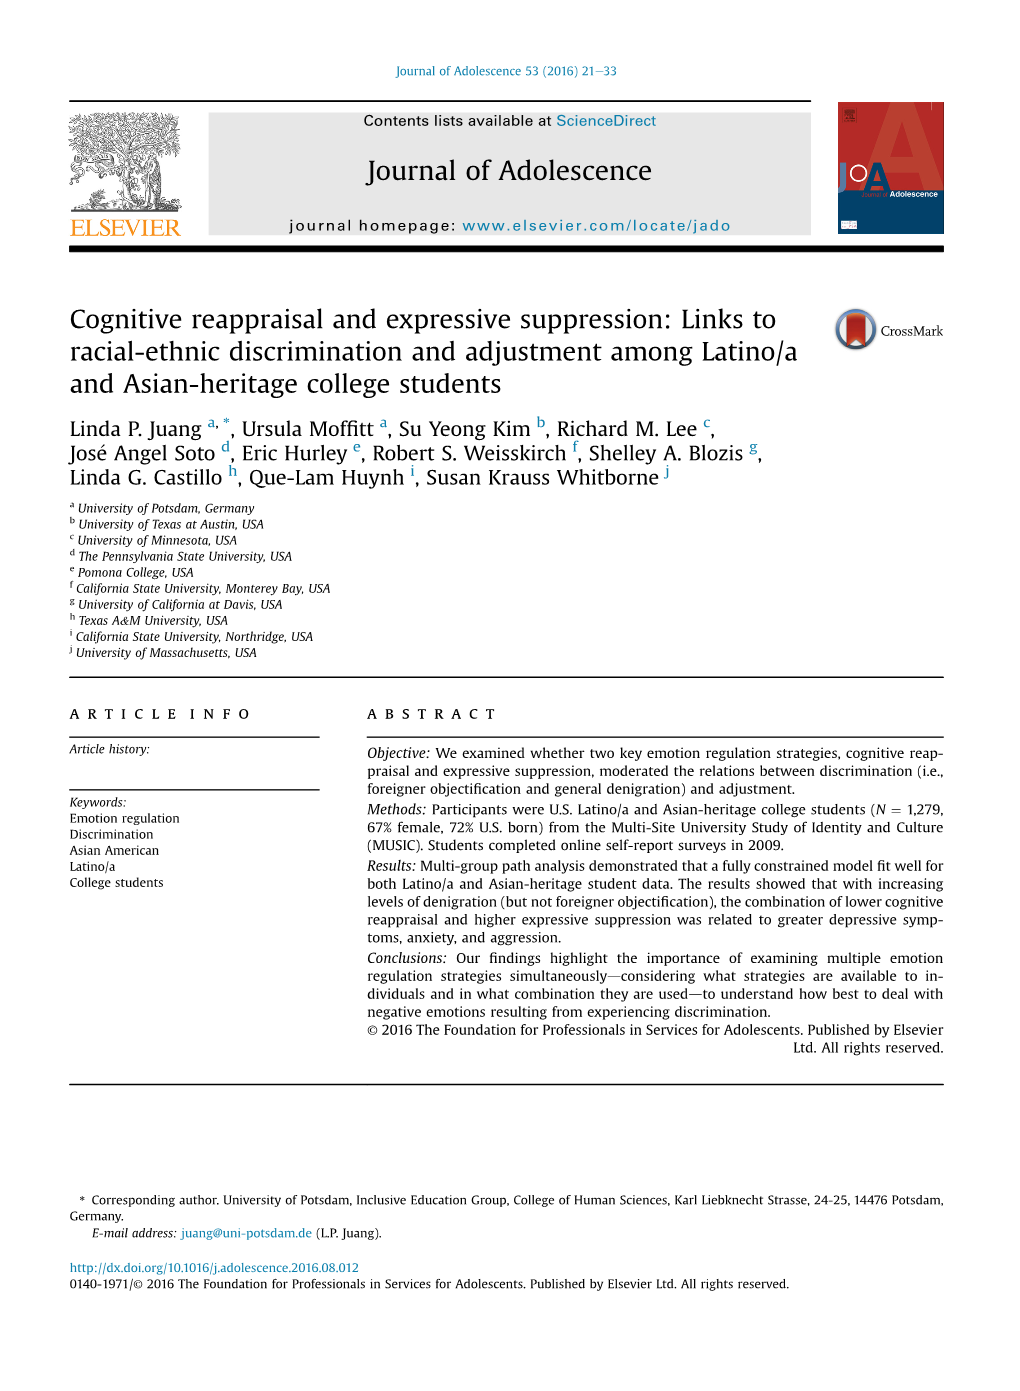 Cognitive Reappraisal and Expressive Suppression: Links to Racial-Ethnic Discrimination and Adjustment Among Latino/A and Asian-Heritage College Students